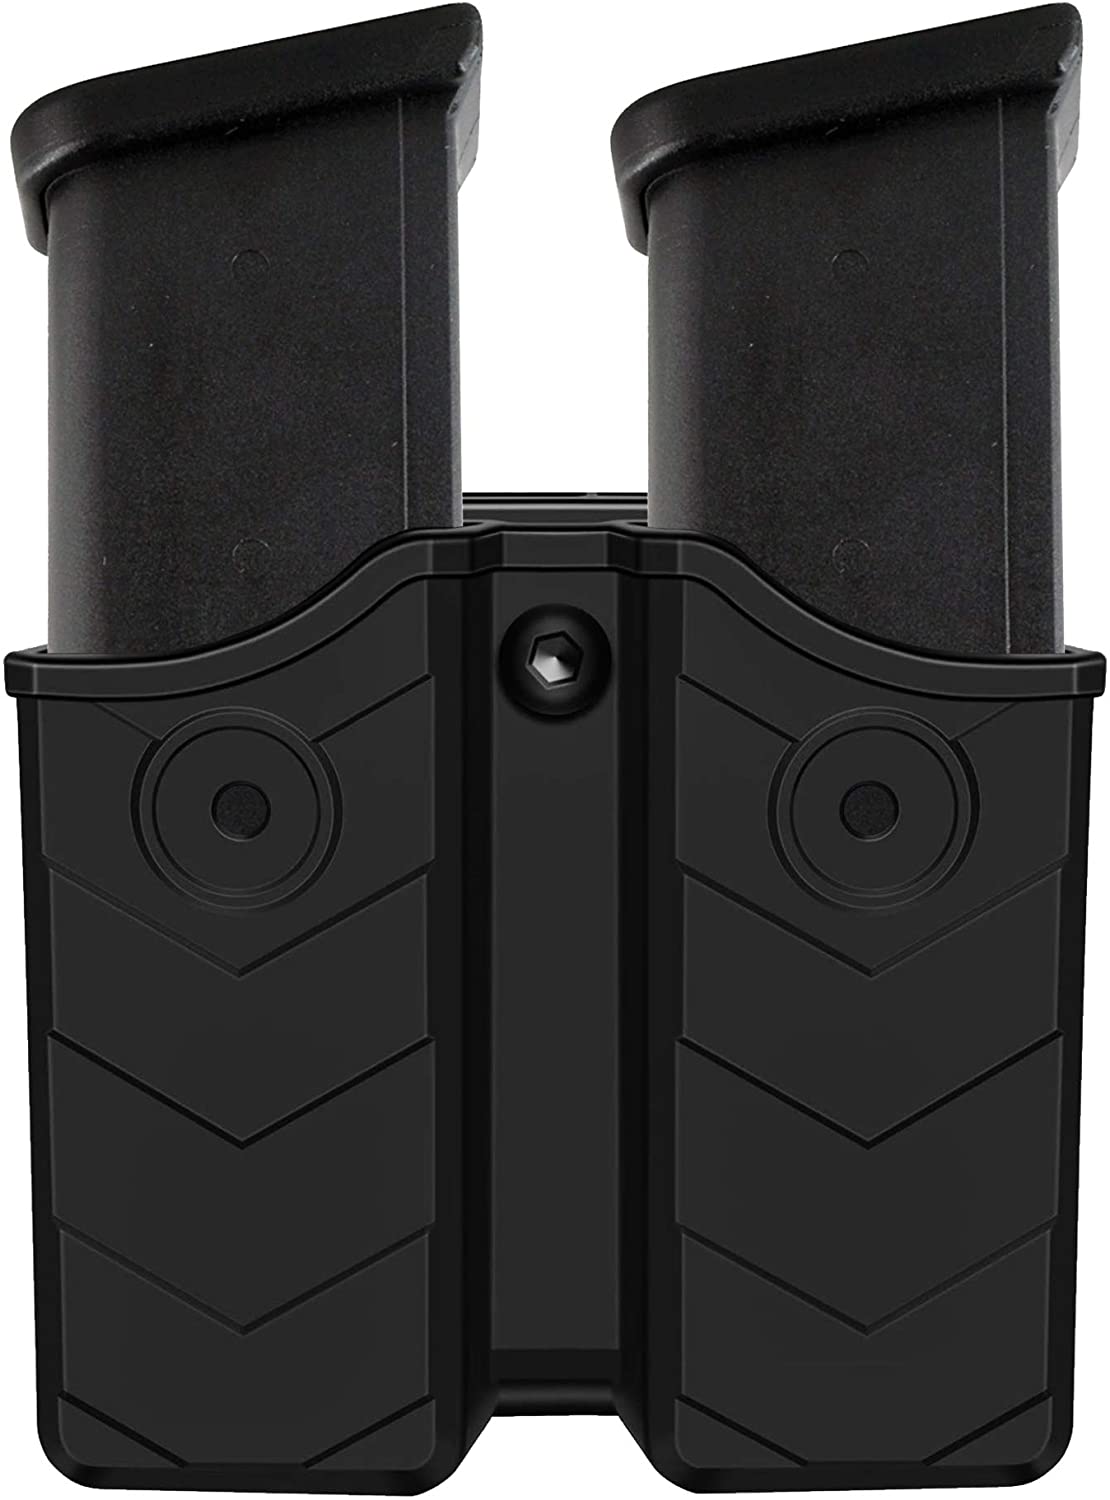 Magazine Holster fit 9mm/.40/.45 Double Stack Magazines, Double Magazine Holder with Adjustable Belt Clip